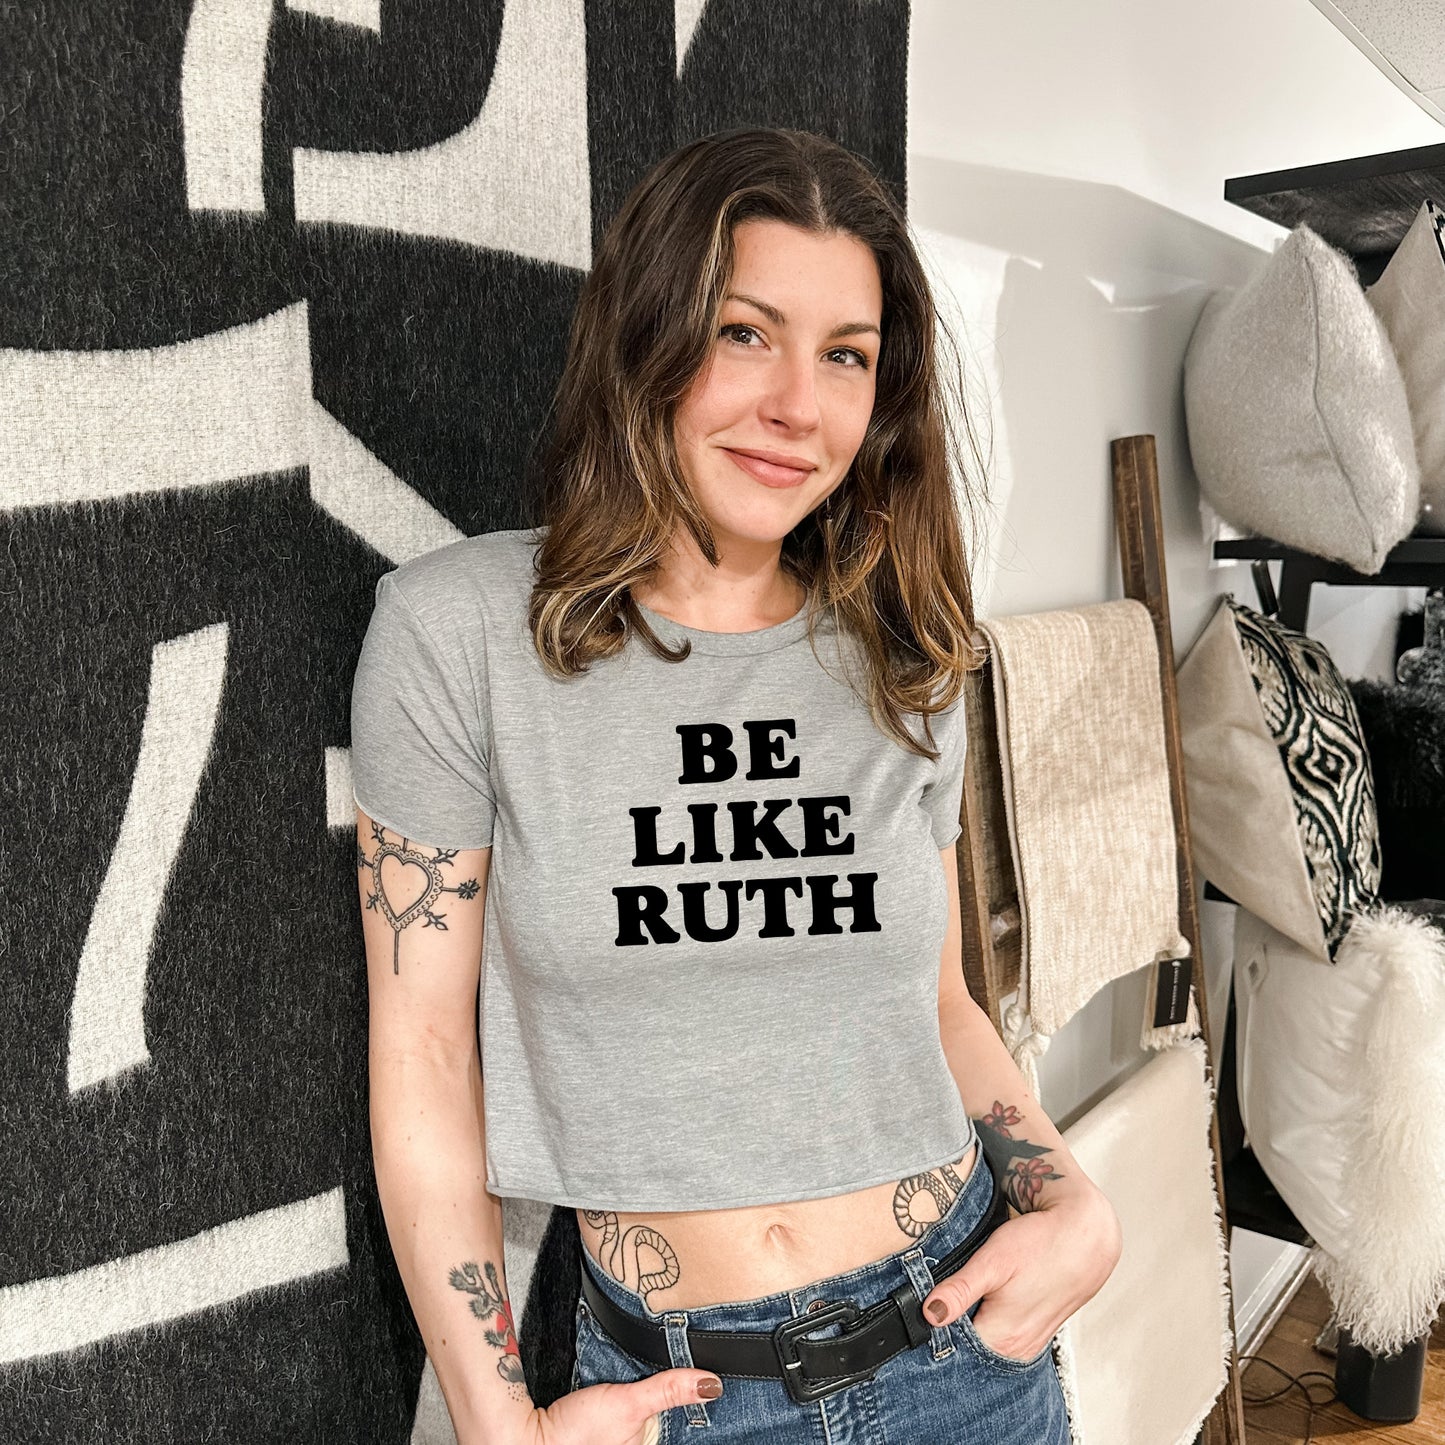 Be Like Ruth (Bader Ginsburg/ RBG) - Women's Crop Tee - Heather Gray or Gold